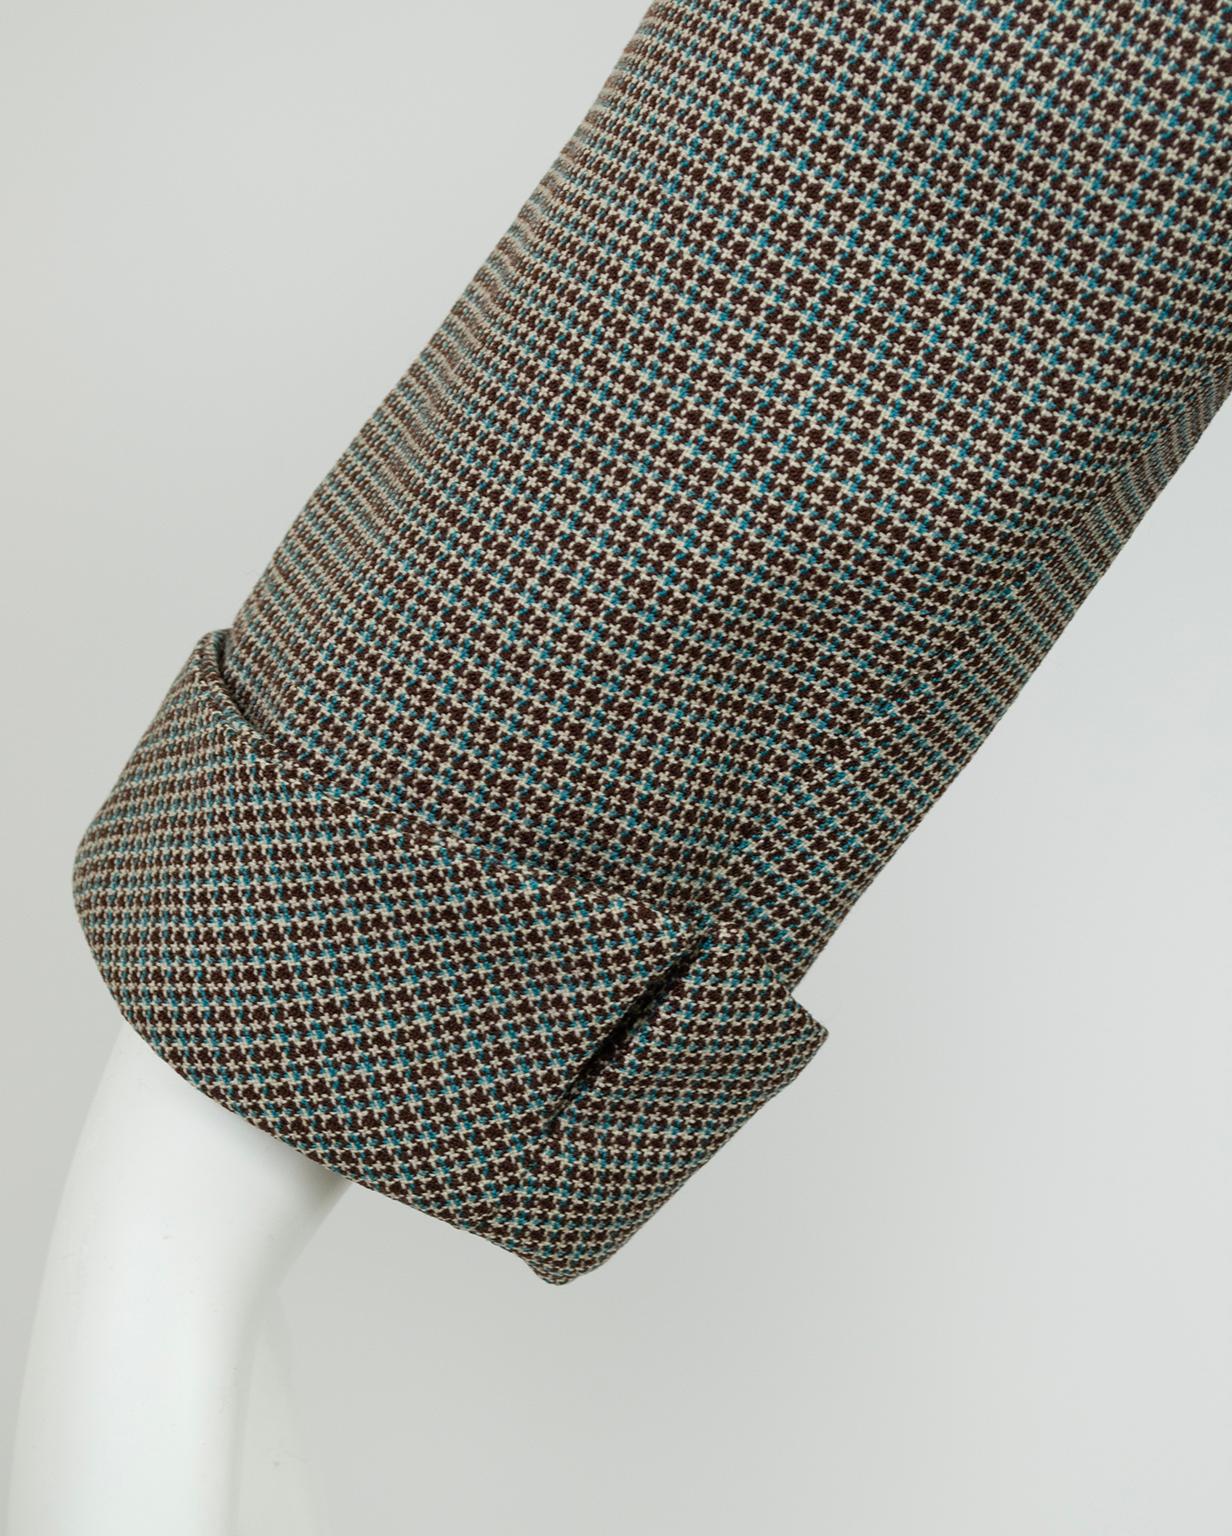 French Blue and Brown Houndstooth Cutaway Suit with Novelty Buttons – S-M, 1940s For Sale 5